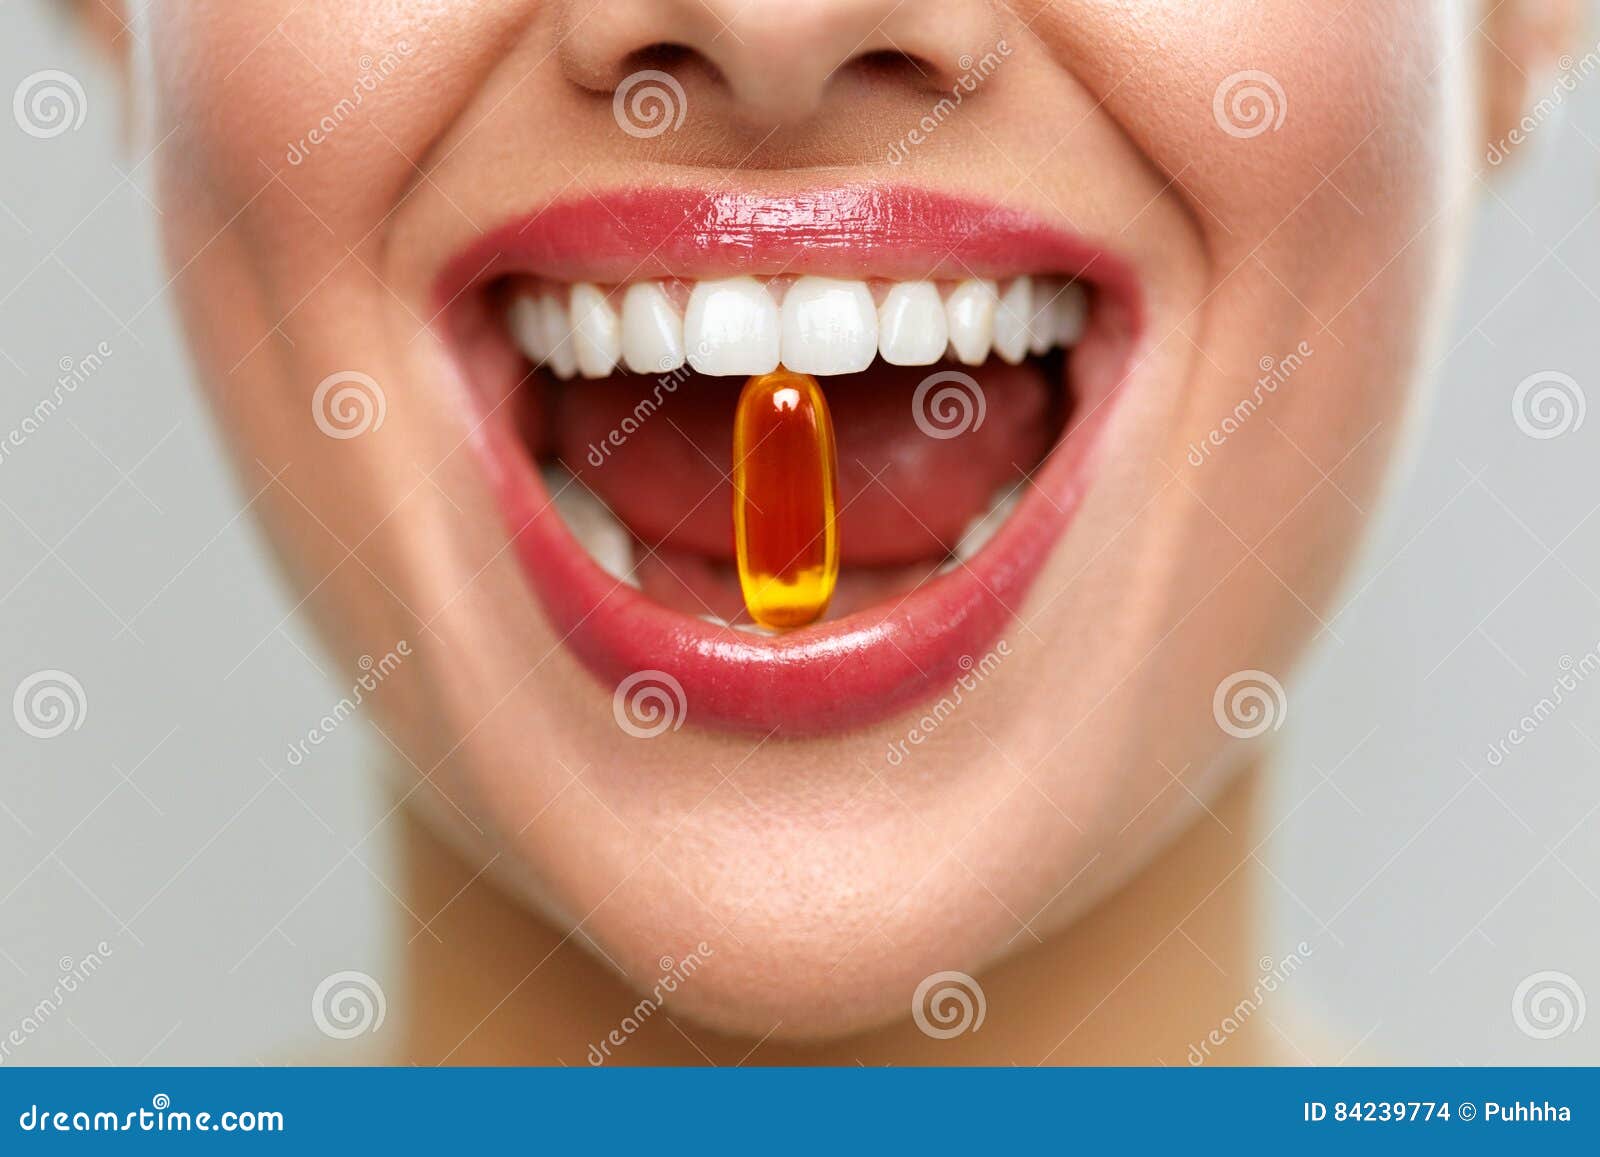 beautiful woman mouth with pill in teeth. girl taking vitamins